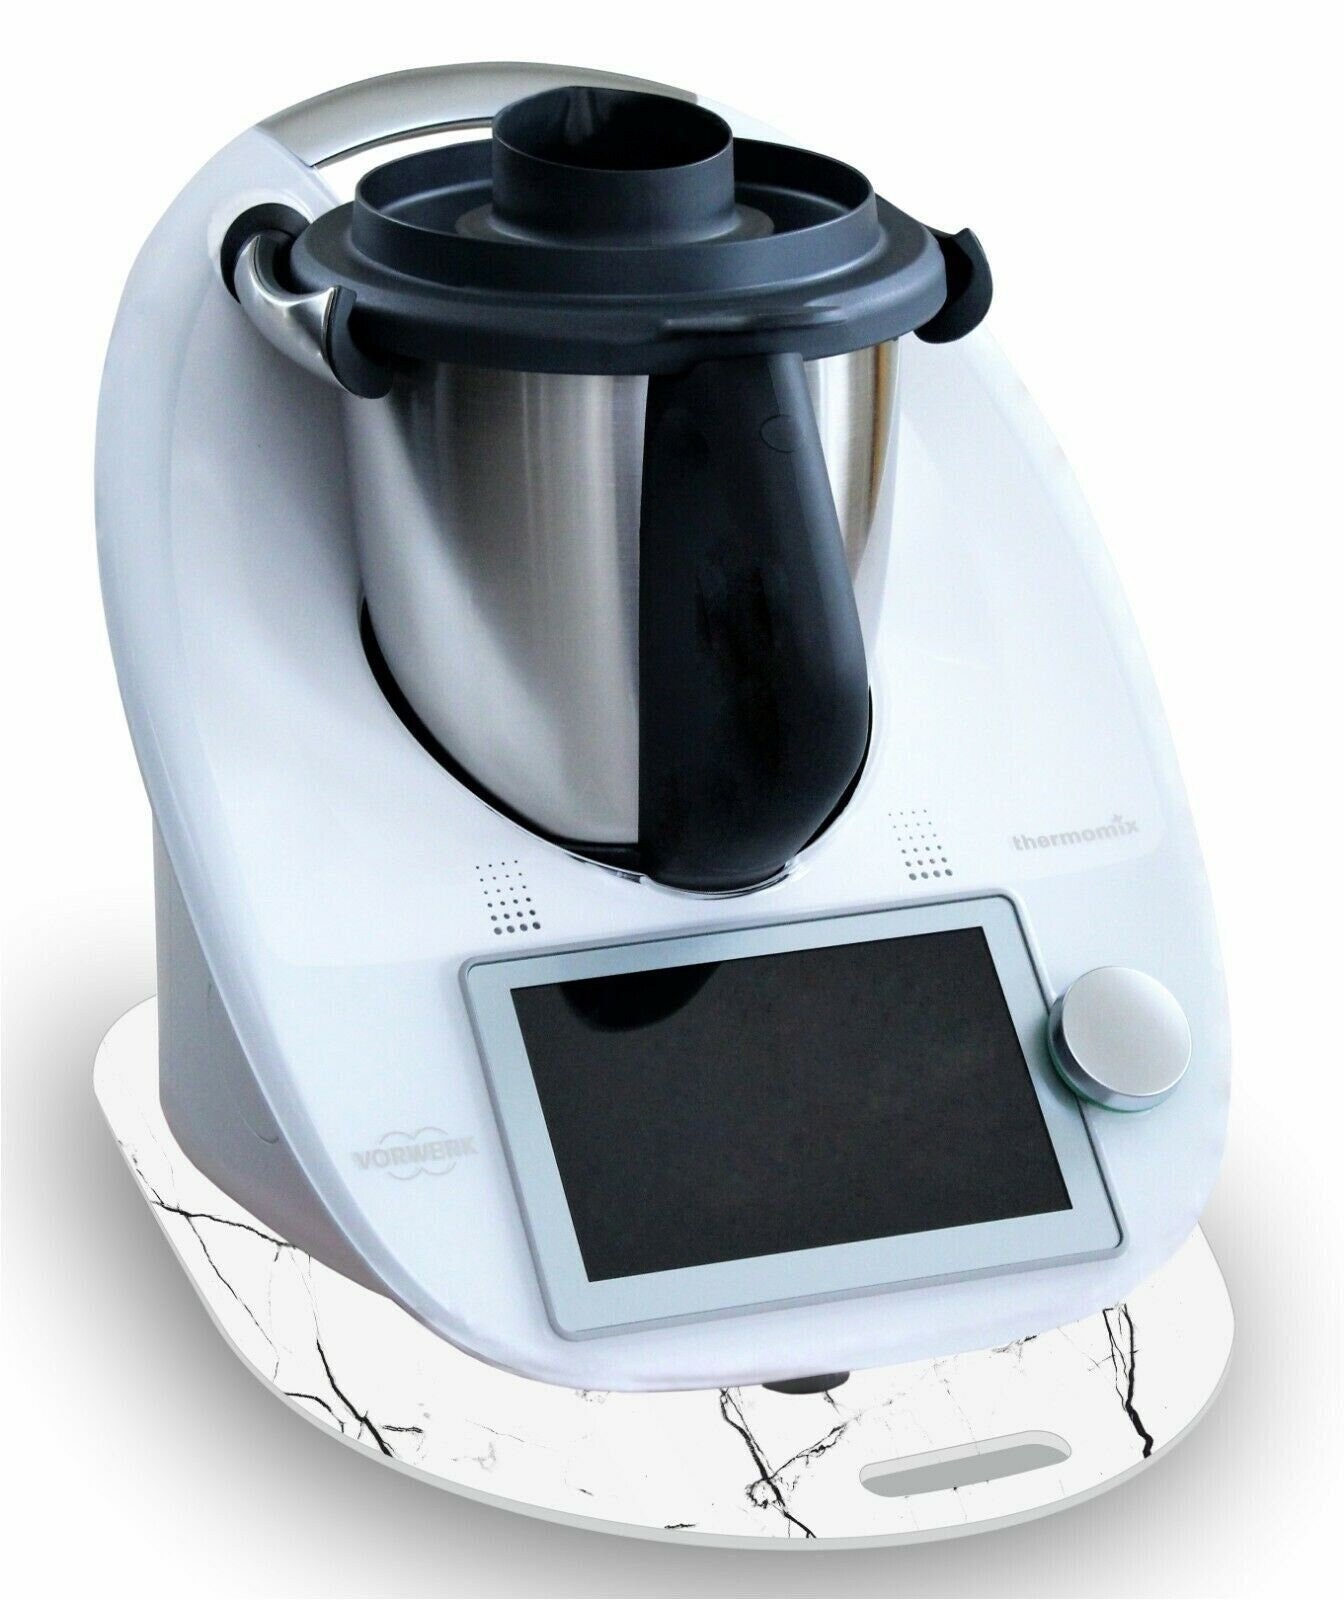 Thermomix Romania: Thermomix TM 31 -Bimby is now available in Romania!!